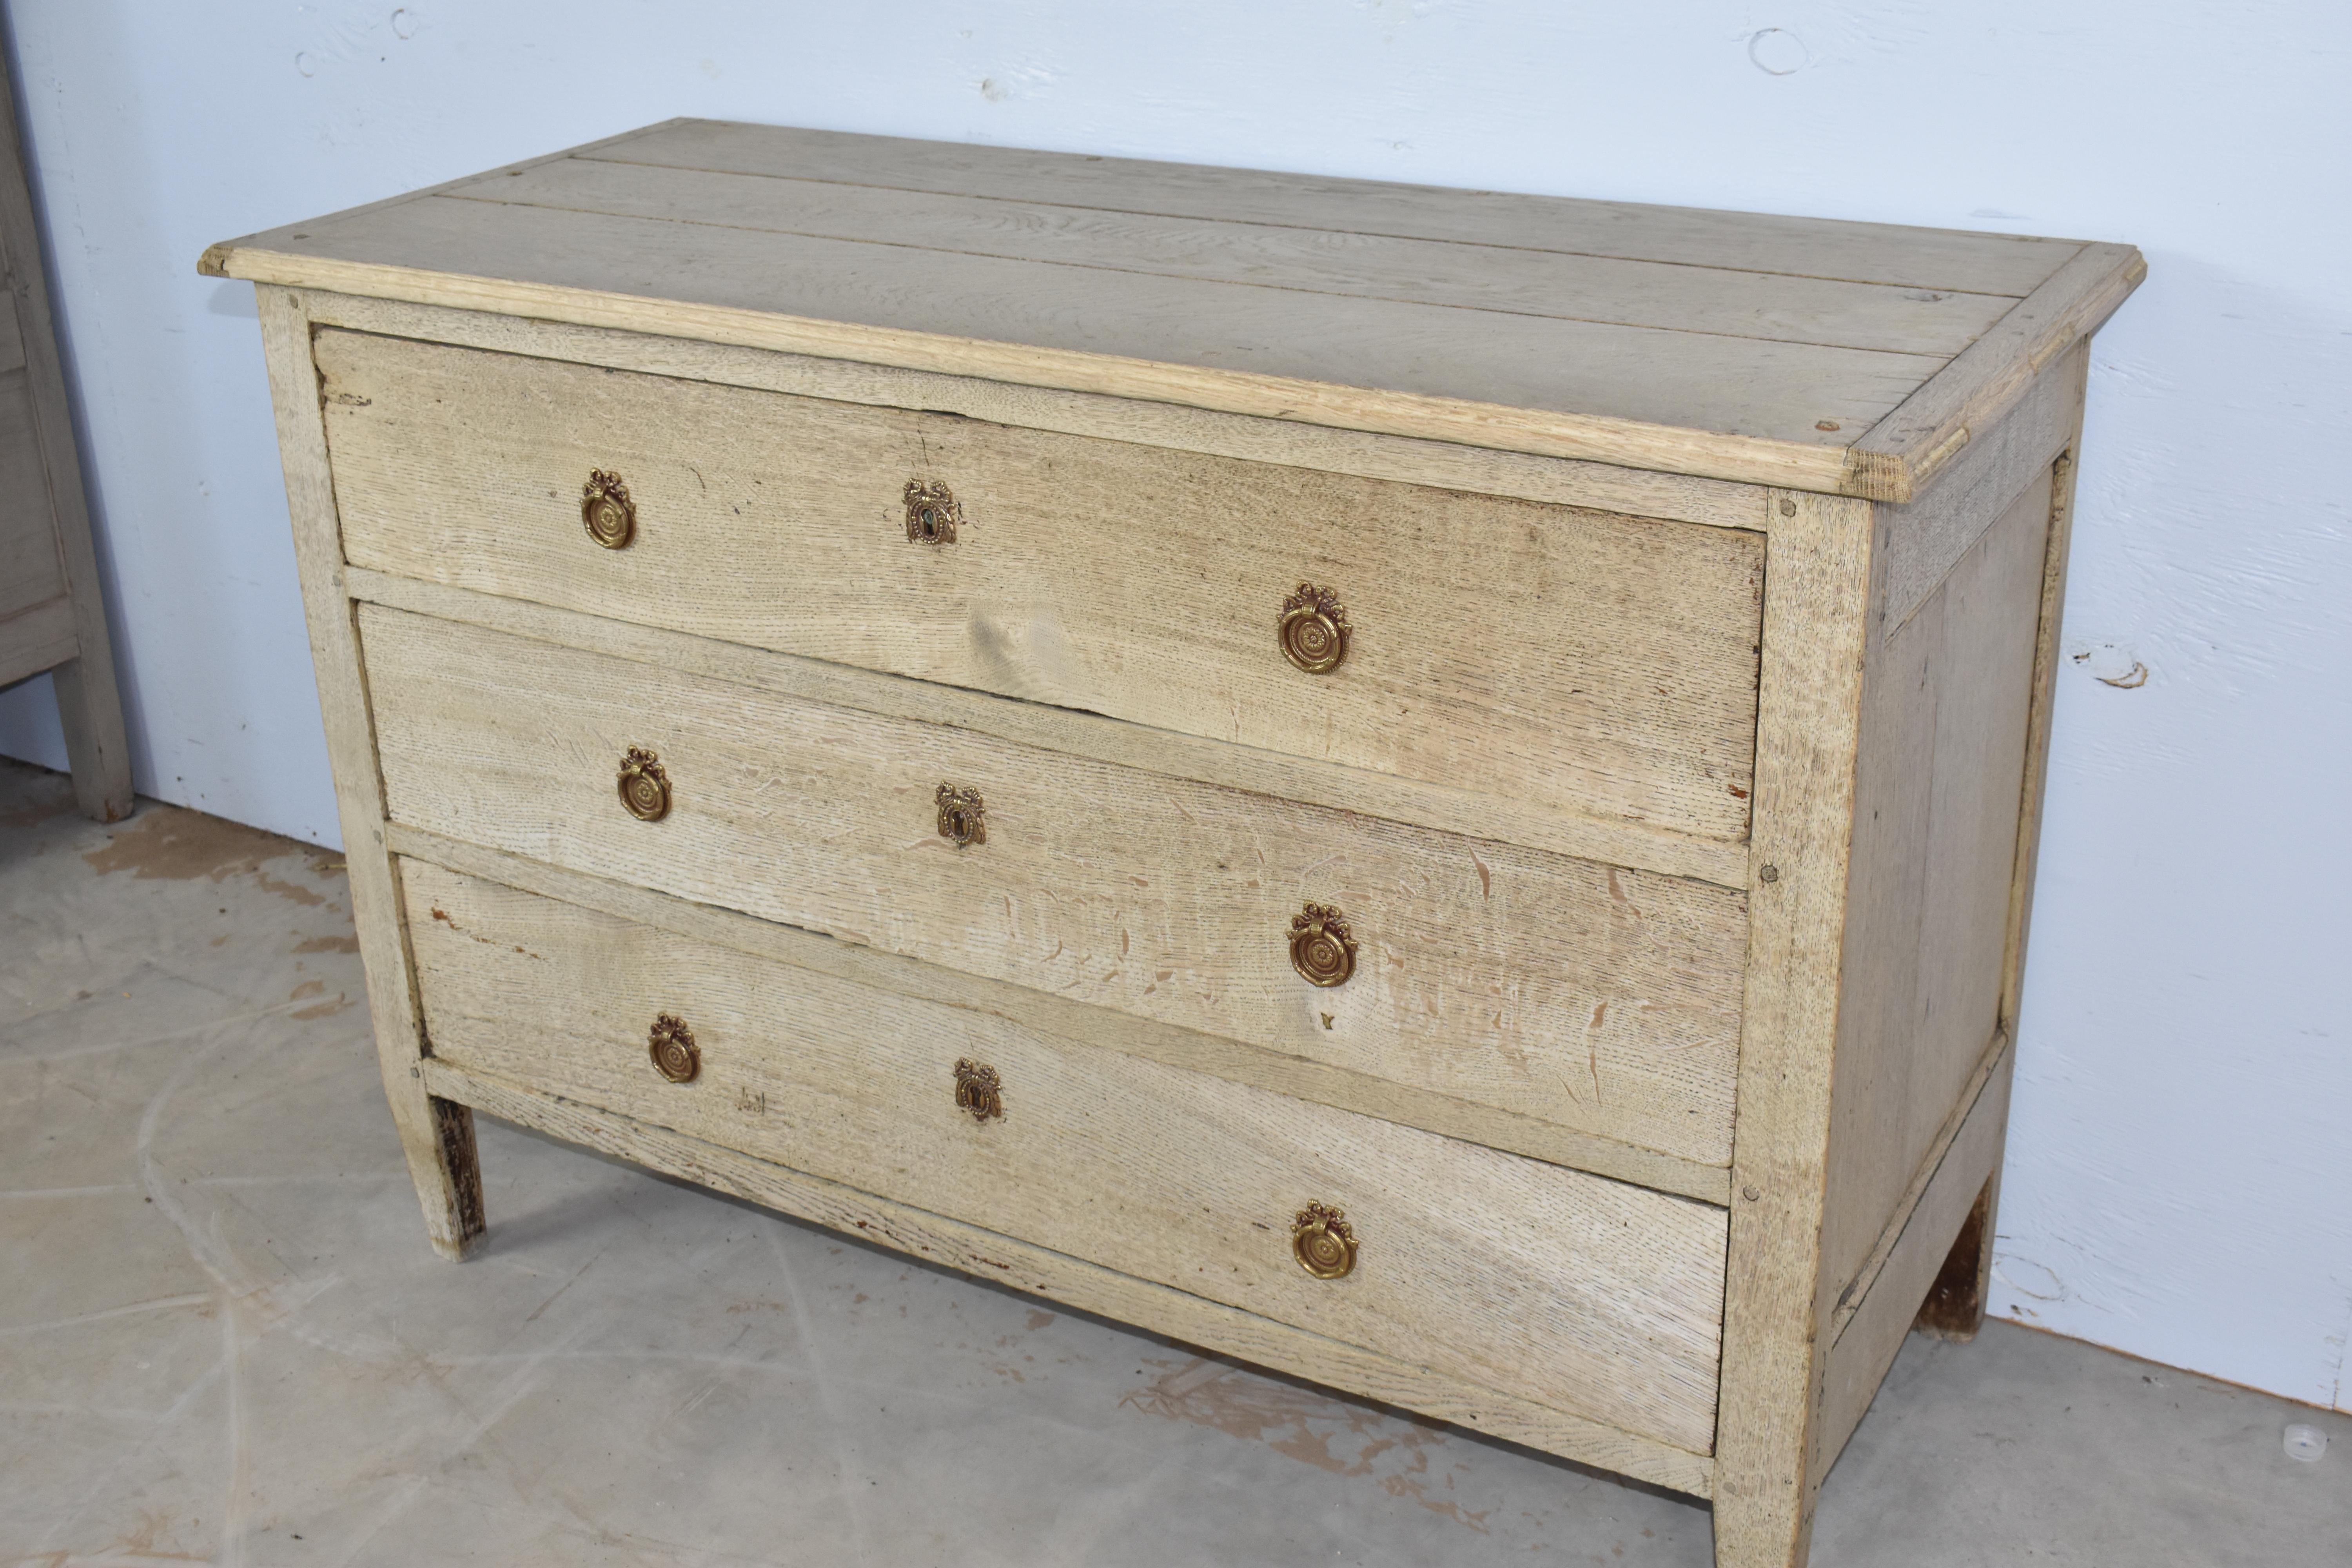 Louis XVI style commode made in France using oak and pegged construction in the early 1800s. The chest has very straight lines and sits on short, tapered legs. The three inset drawers are, roughly, all the same size and will provide plenty of